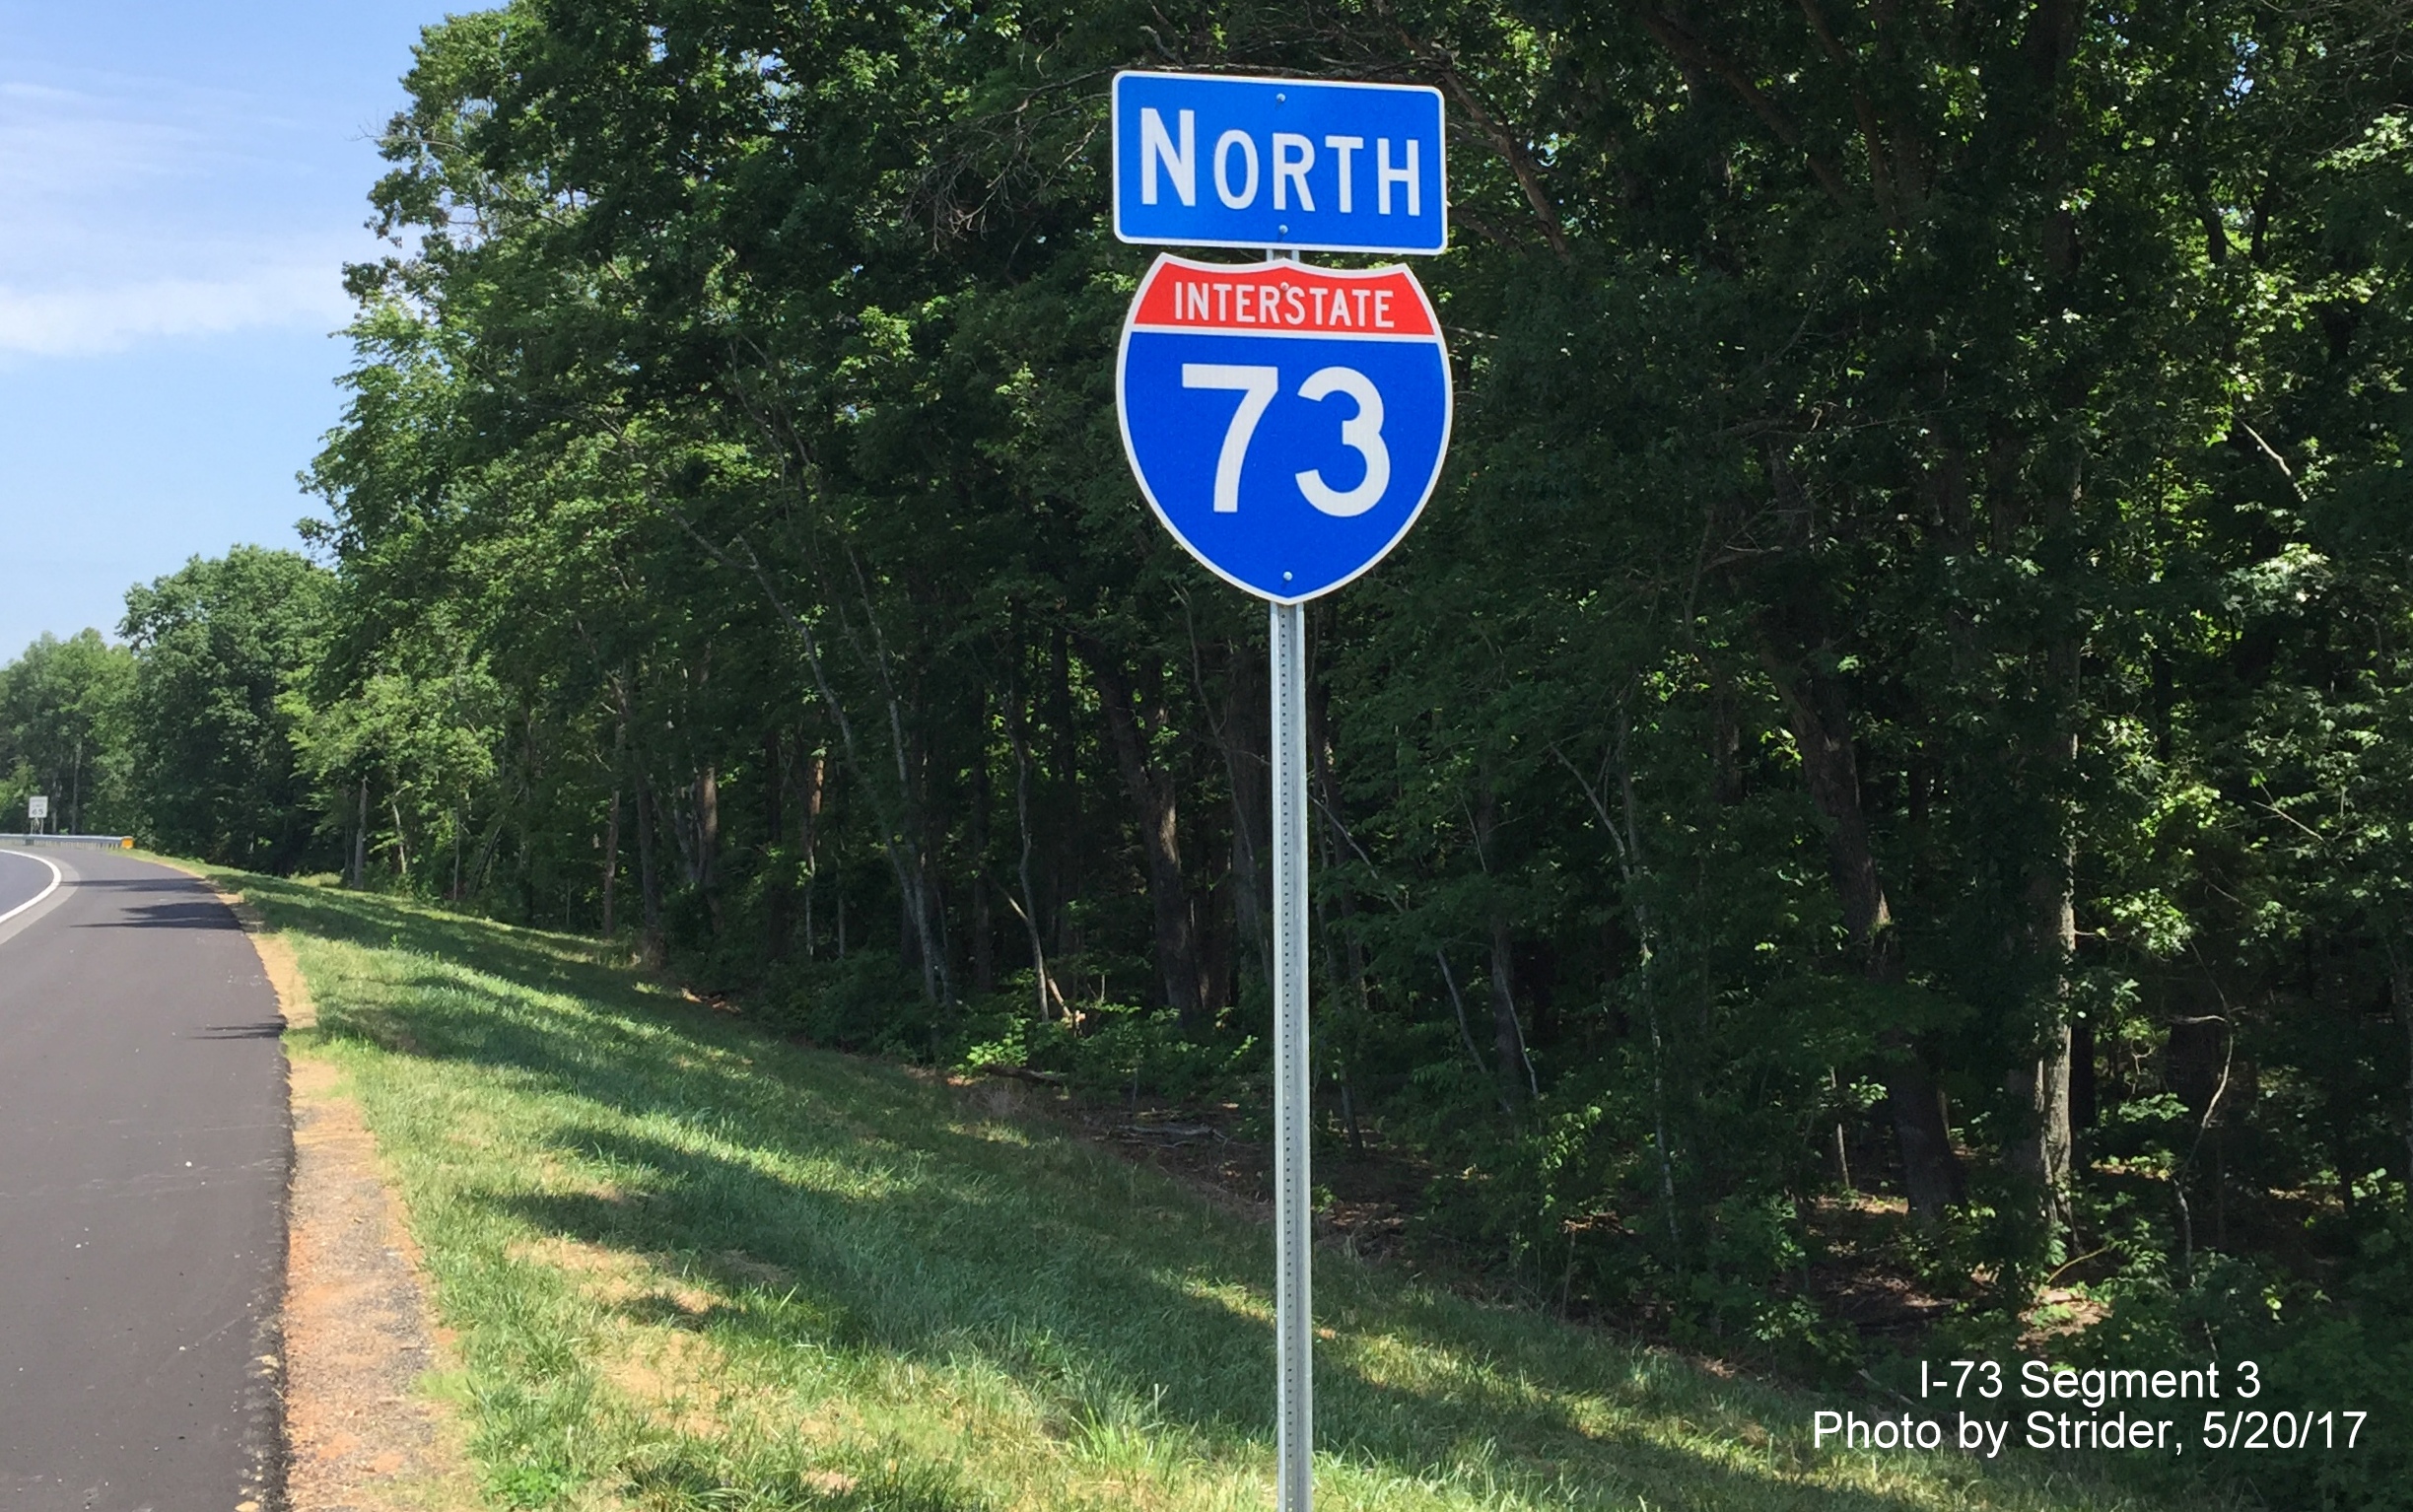 Image taken of I-73 North reassurance marker after NC 68 on-ramp, by Strider